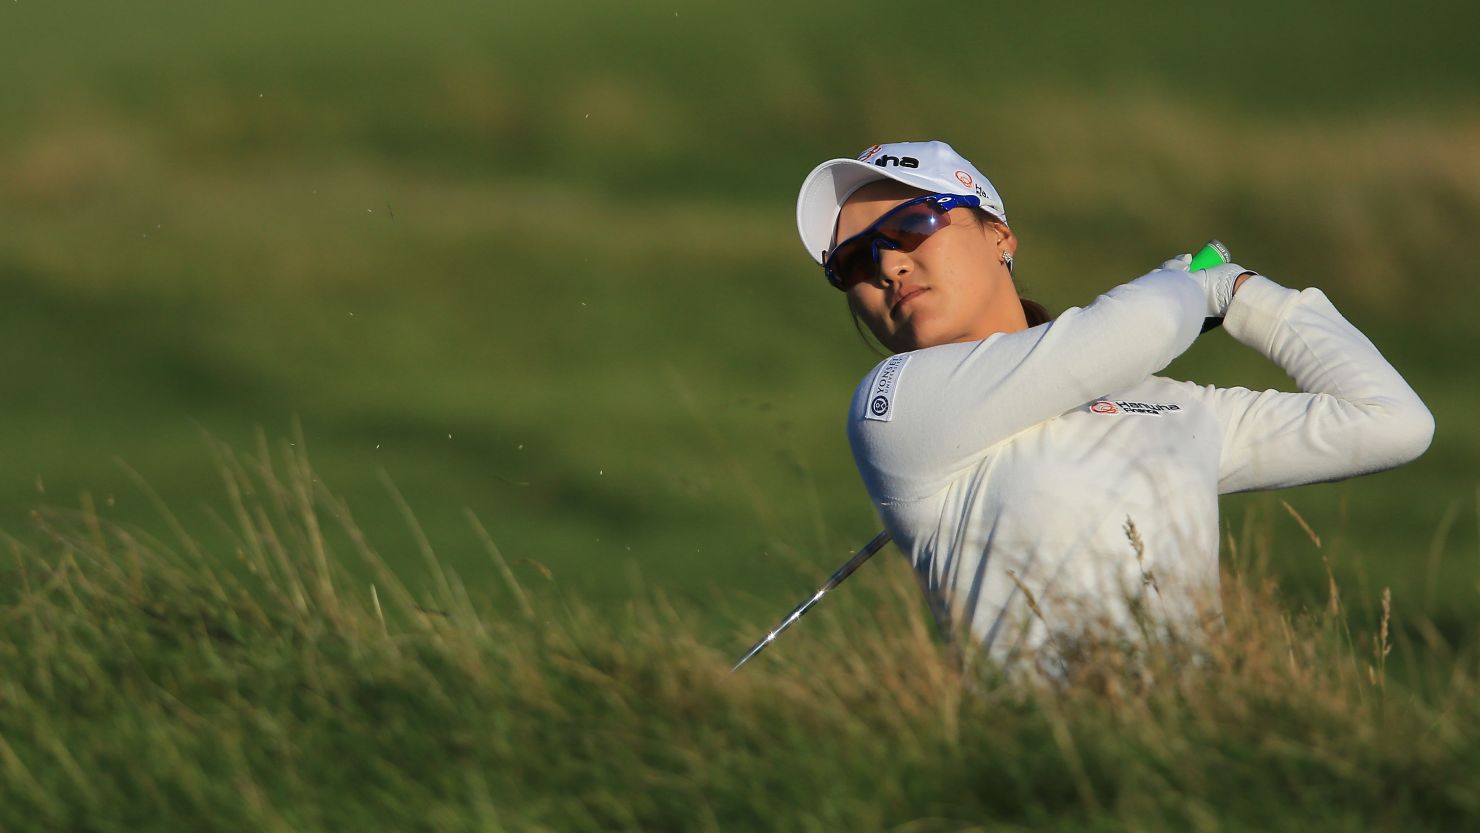 South Korea's So Yeon Ryu is joint-leader after the opening round of Women's British Open at Hoylake